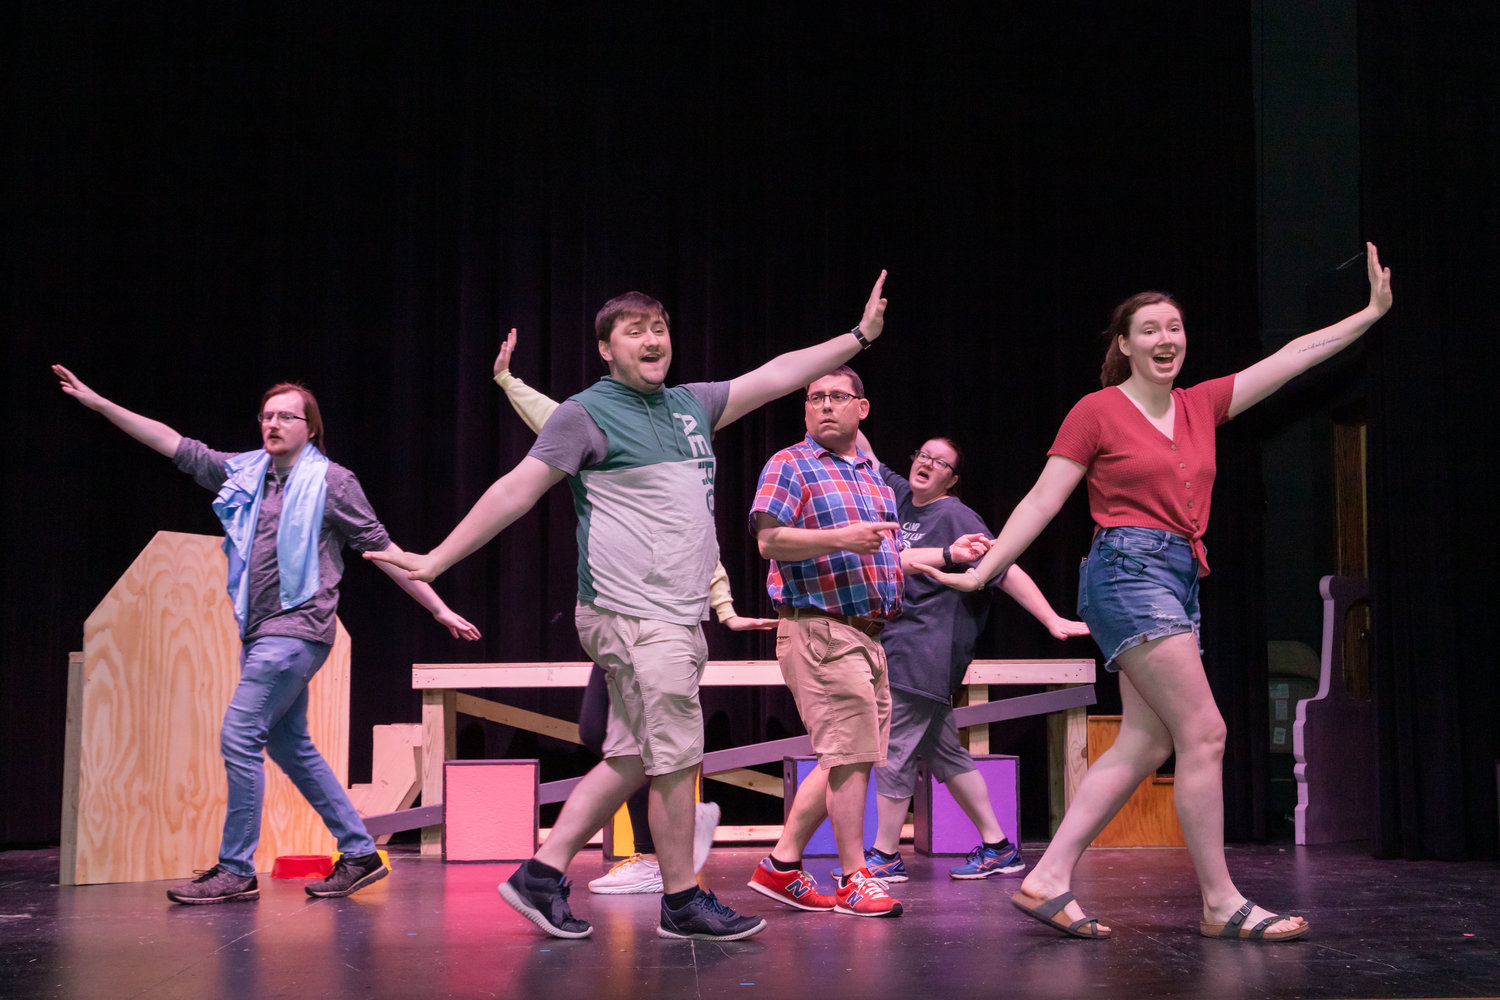 Charlie Brown (Ian Linenfelser) looks confused as Linus (Nate Gard), Schroeder (Leo Hammond), Sally (Camille Blanford) and Snoopy (Vickie Fischer) dance around him during a rehearsal for “You’re a Good Man, Charlie Brown” which opens April 21 at 4th Street Theatre in Moberly.